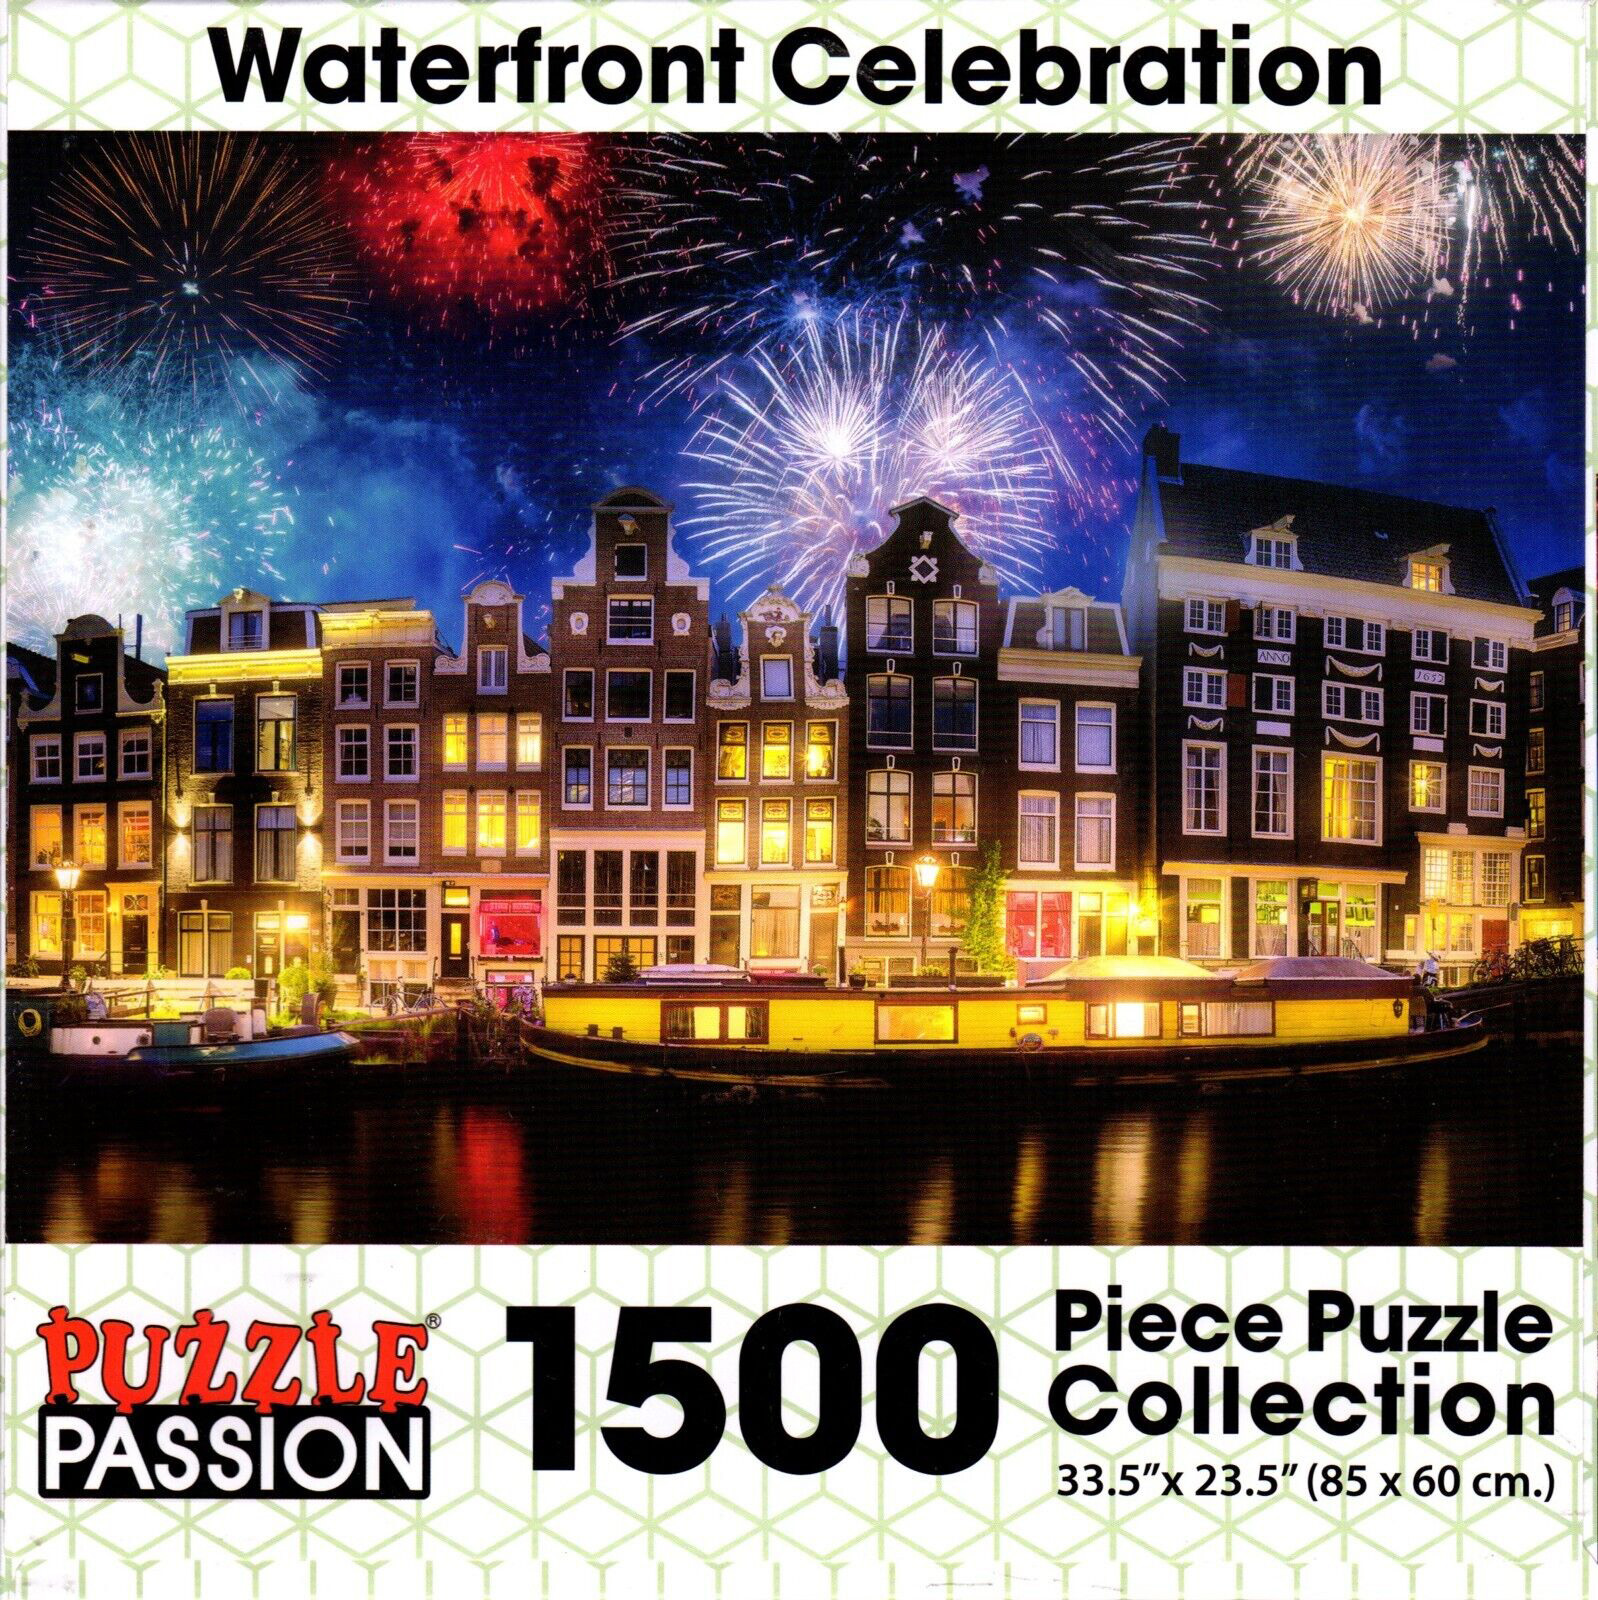 Waterfront Celebration - Scratch and Dent Boat Jigsaw Puzzle